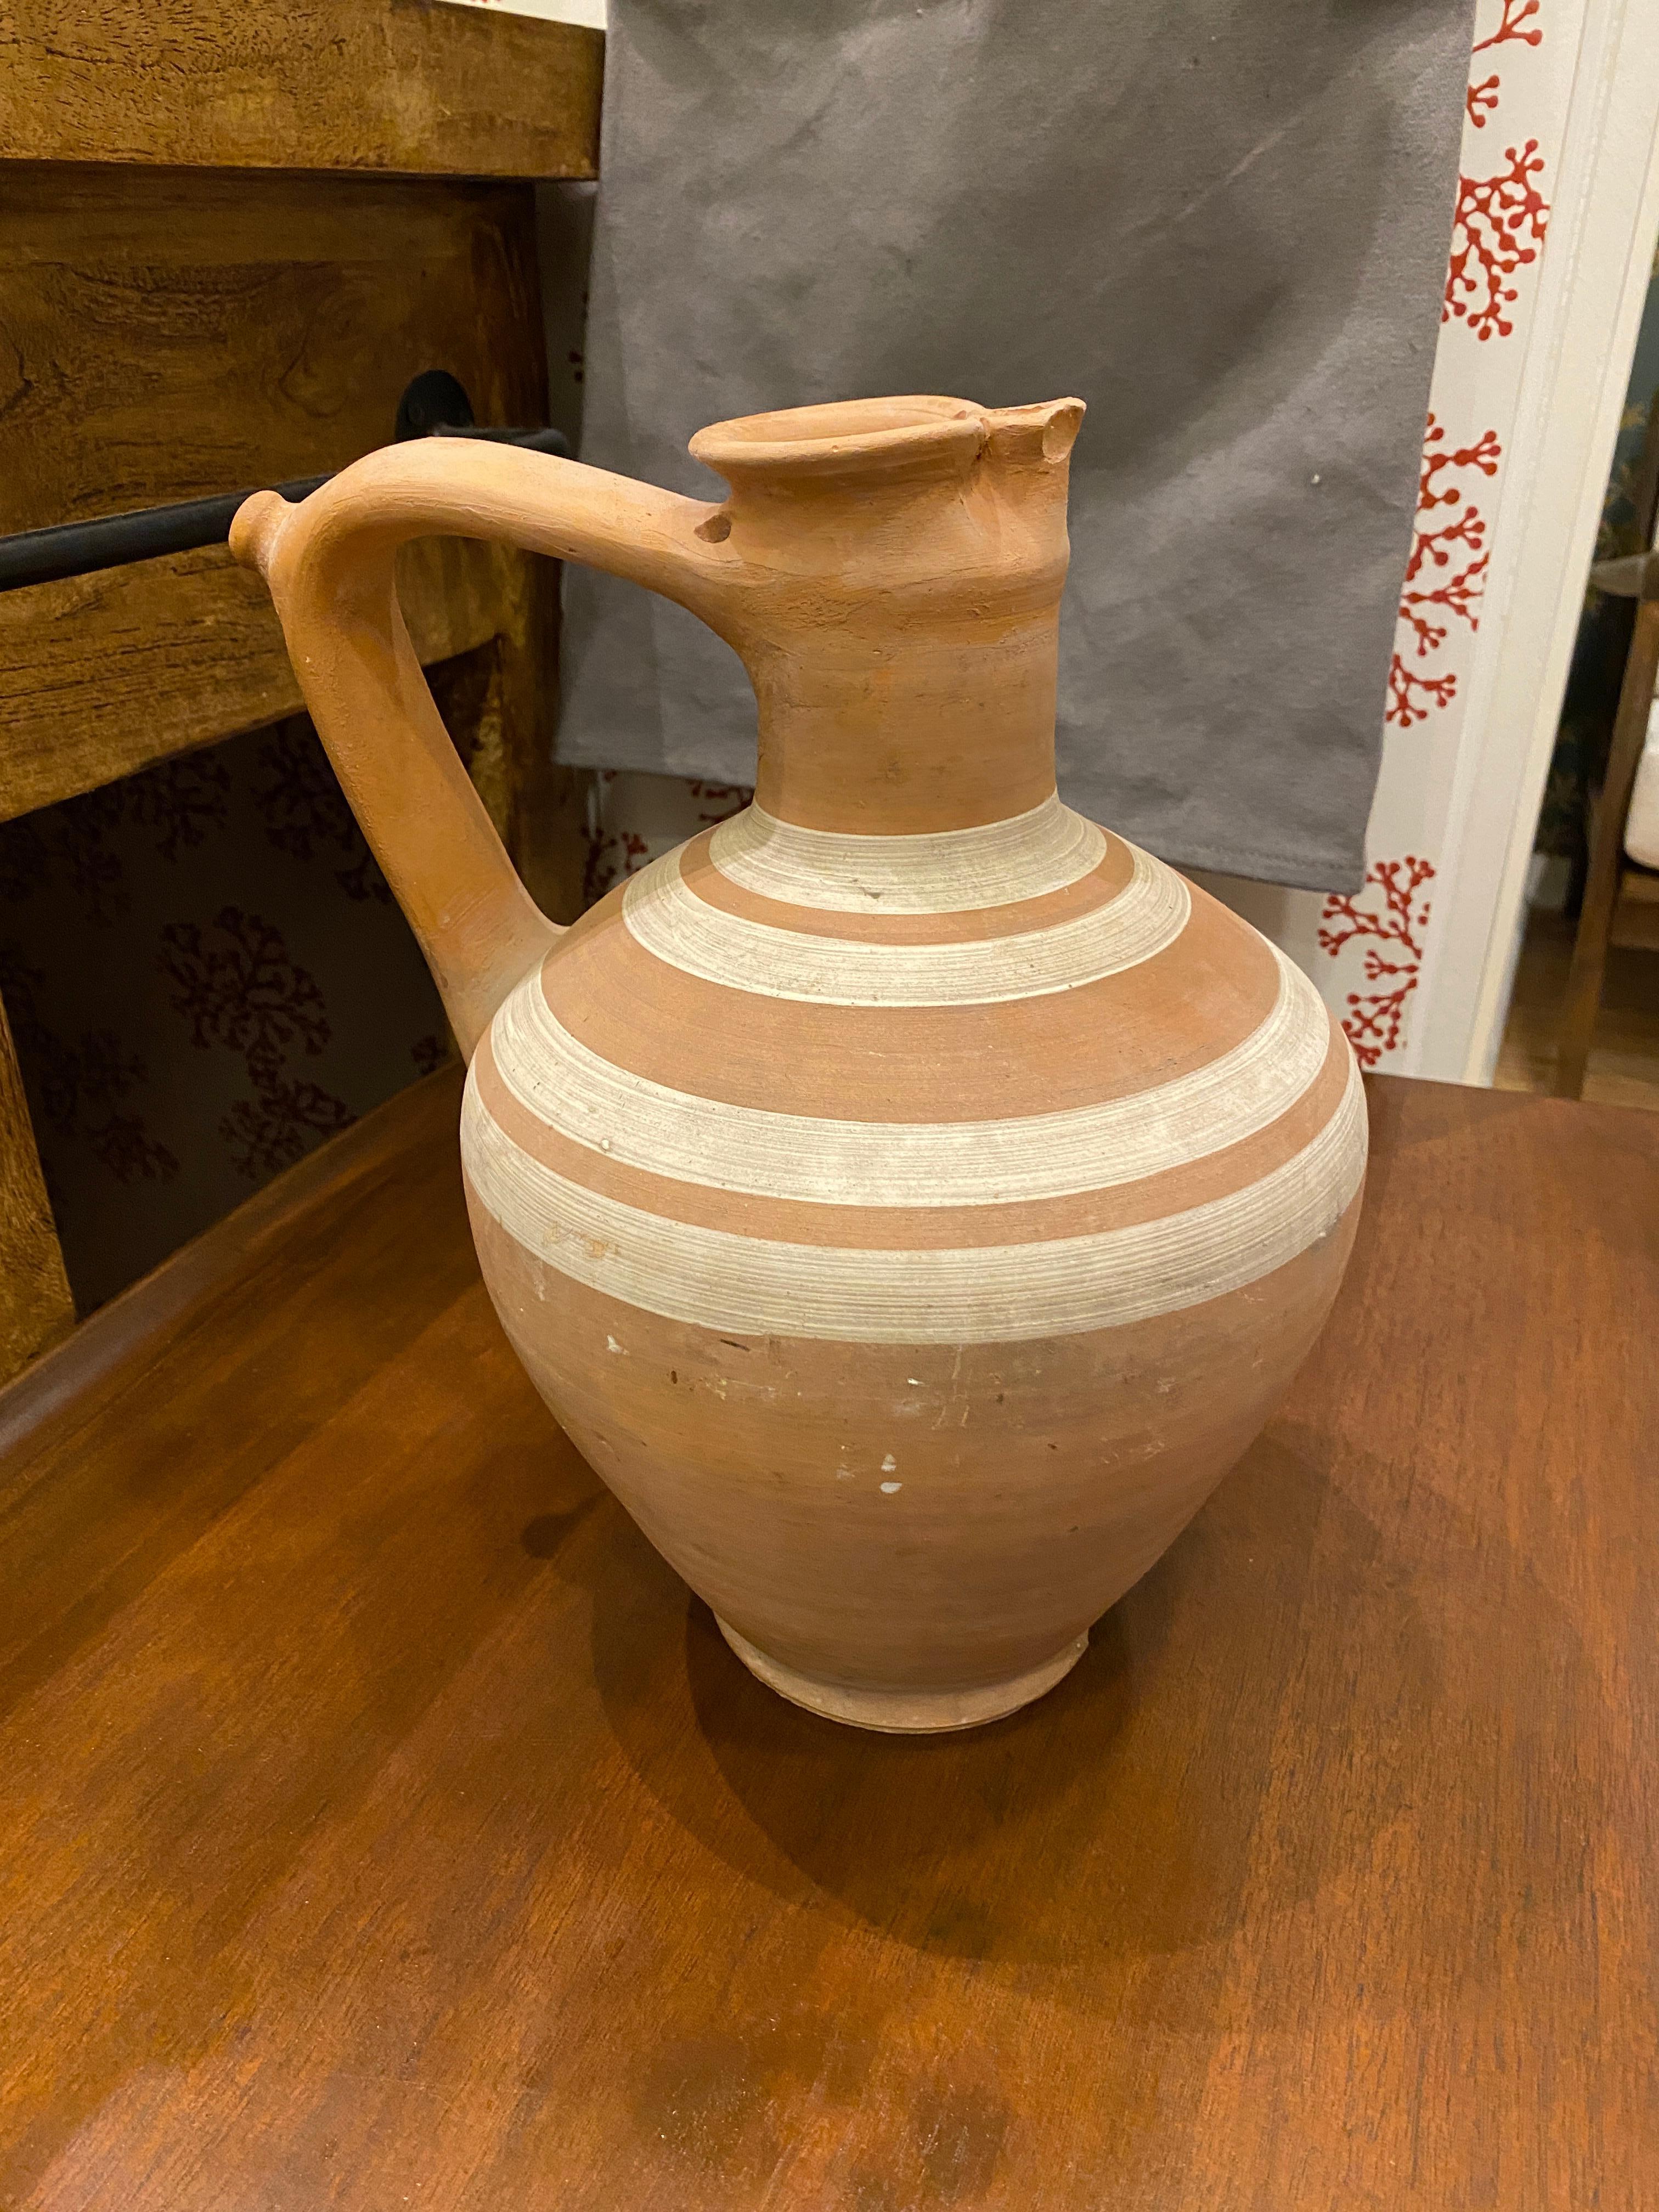 A pristine vintage wine carafe in a beautiful warm terracotta color. A great accent piece for a home looking to add warmth and history to their home decor.